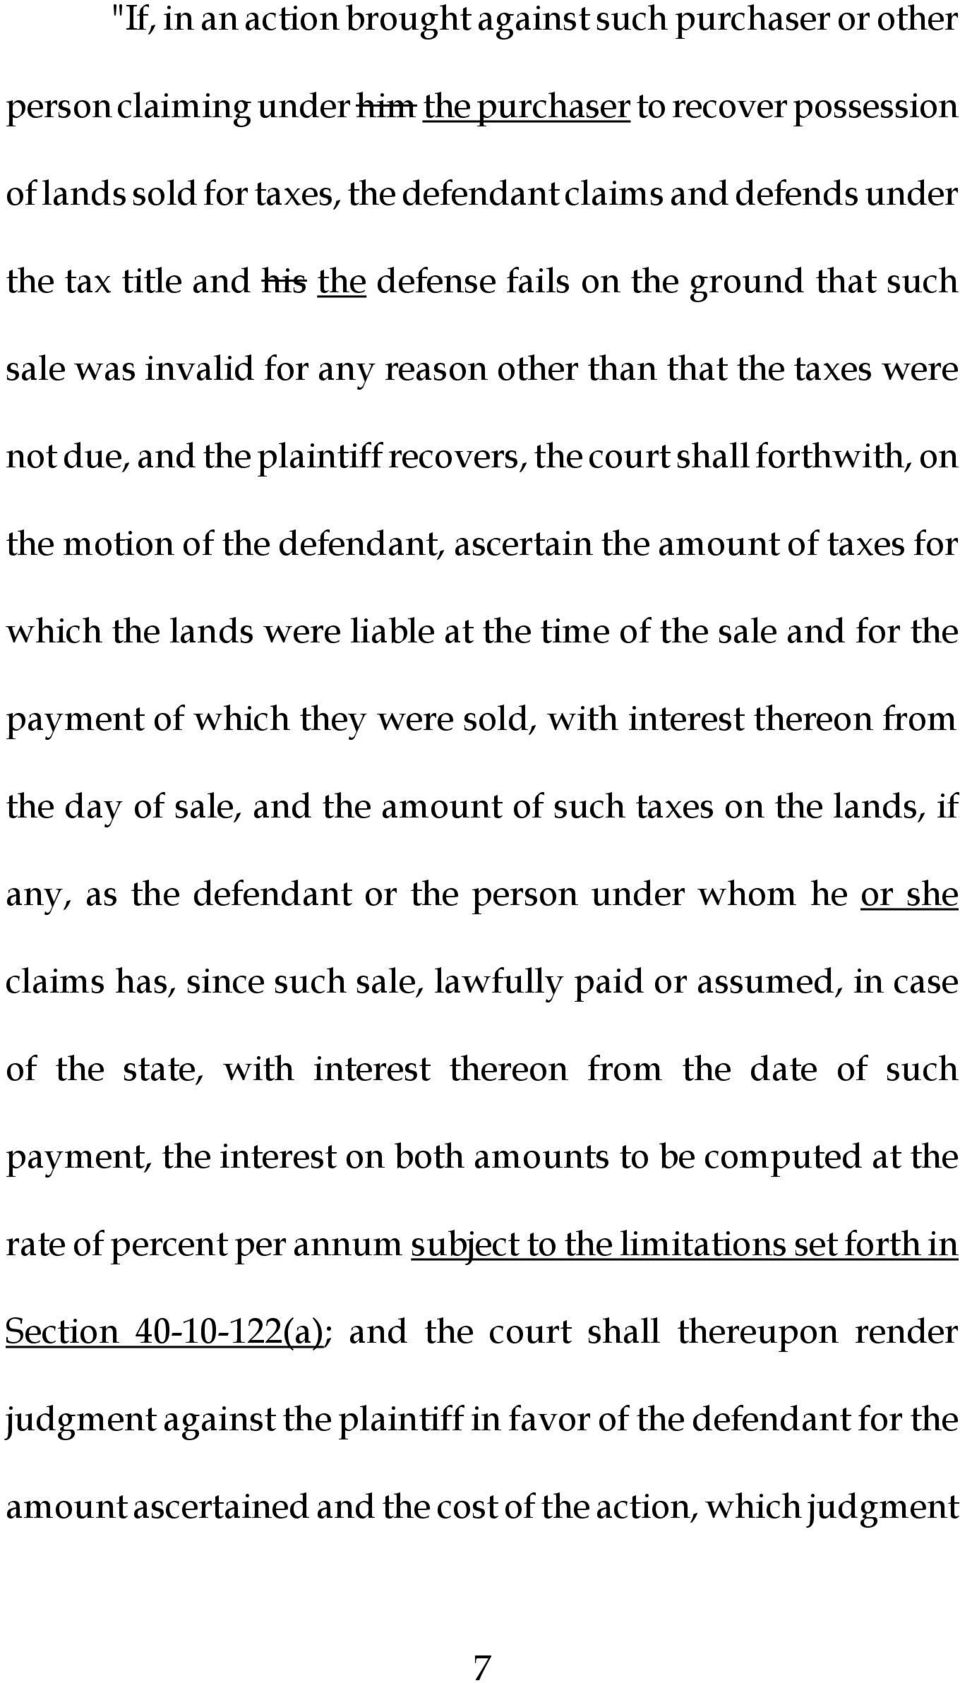 defendant, ascertain the amount of taxes for which the lands were liable at the time of the sale and for the payment of which they were sold, with interest thereon from the day of sale, and the